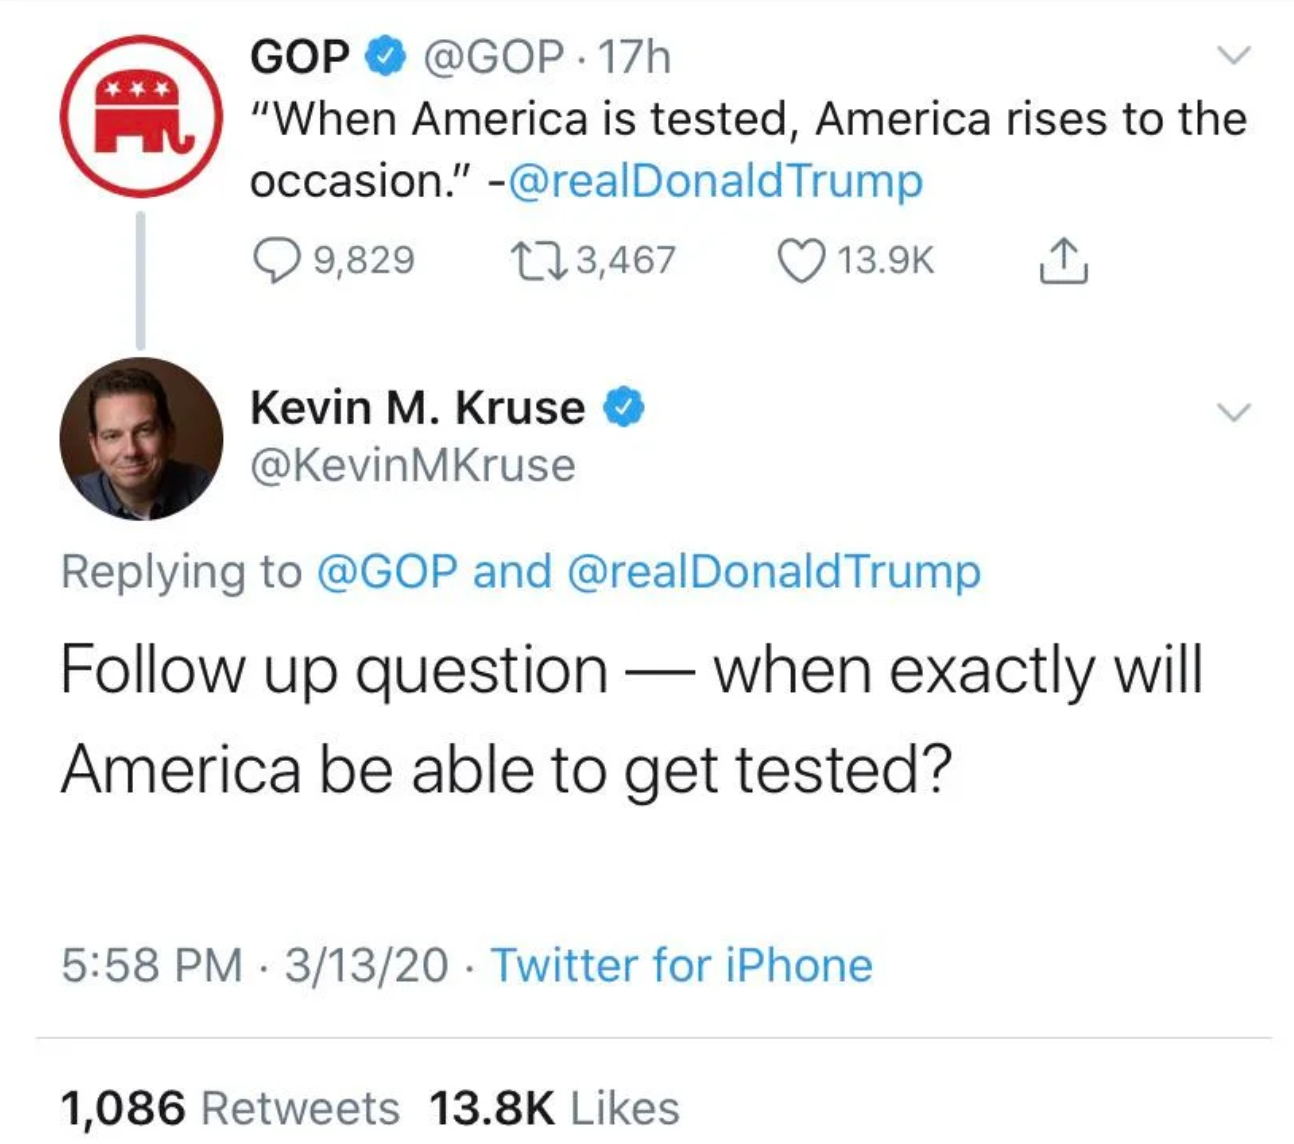 diagram - Gop 9 Gop . 17h "When America is tested, America rises to the occasion." Trump 9,829 273,467 1 Kevin M. Kruse and Trump up question when exactly will America be able to get tested? 31320 Twitter for iPhone 1,086